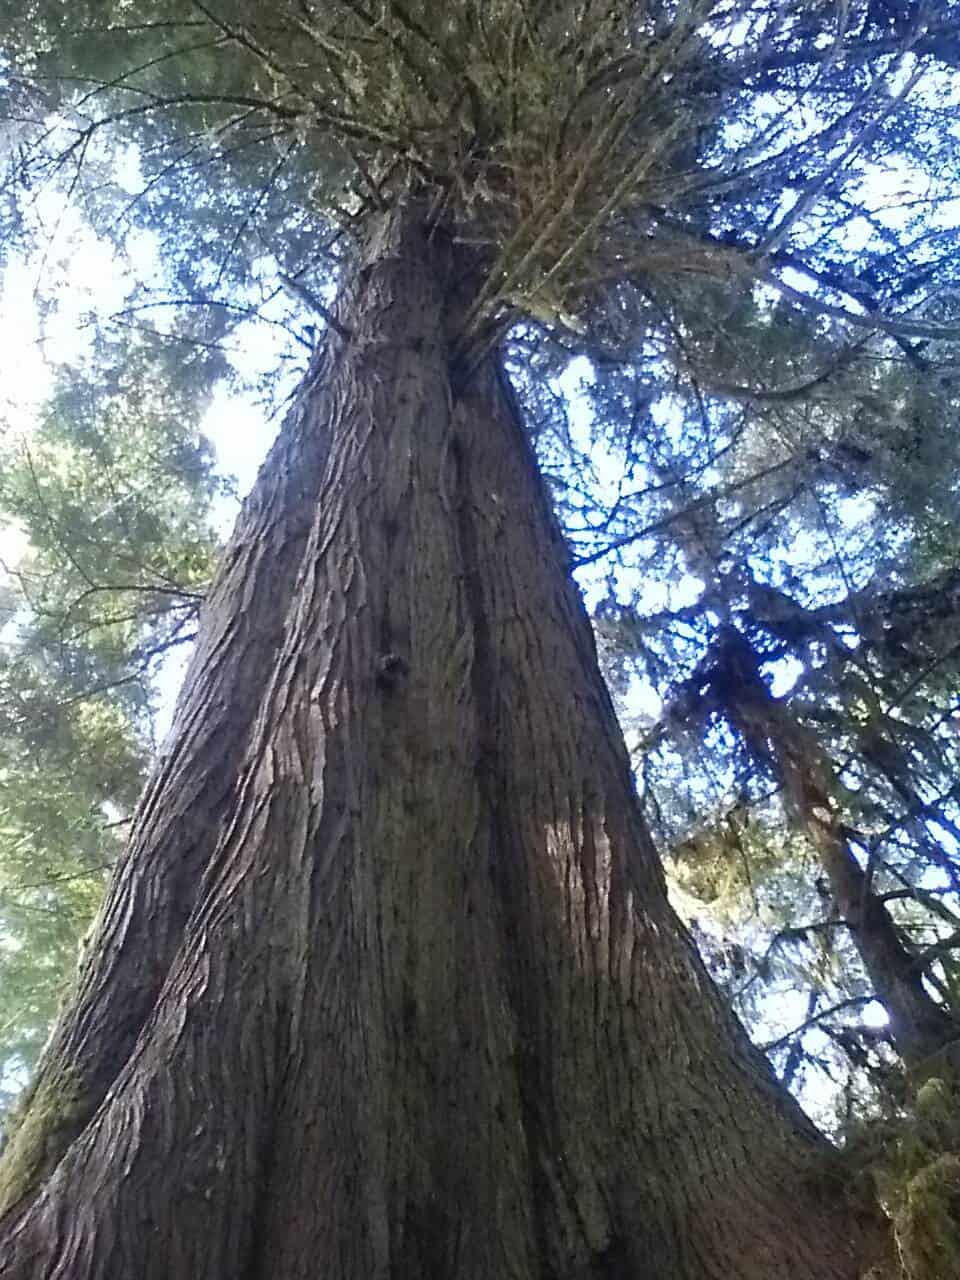 Huge tree - Cathedral Grove. Biggest trees I've ever seen!